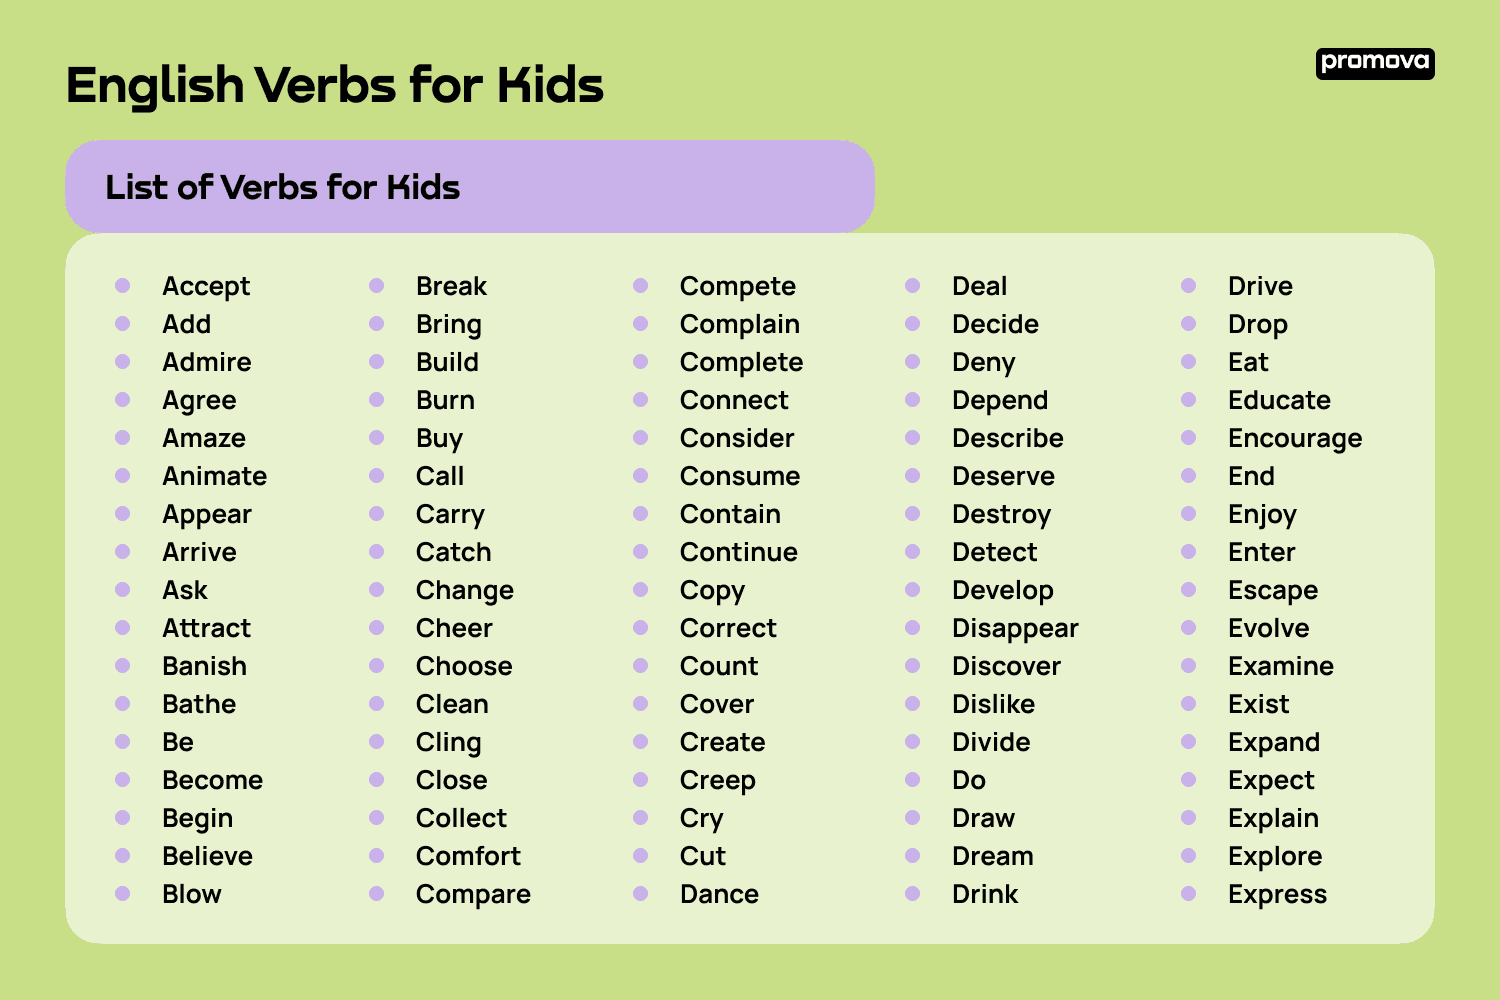 English Verbs for Kids